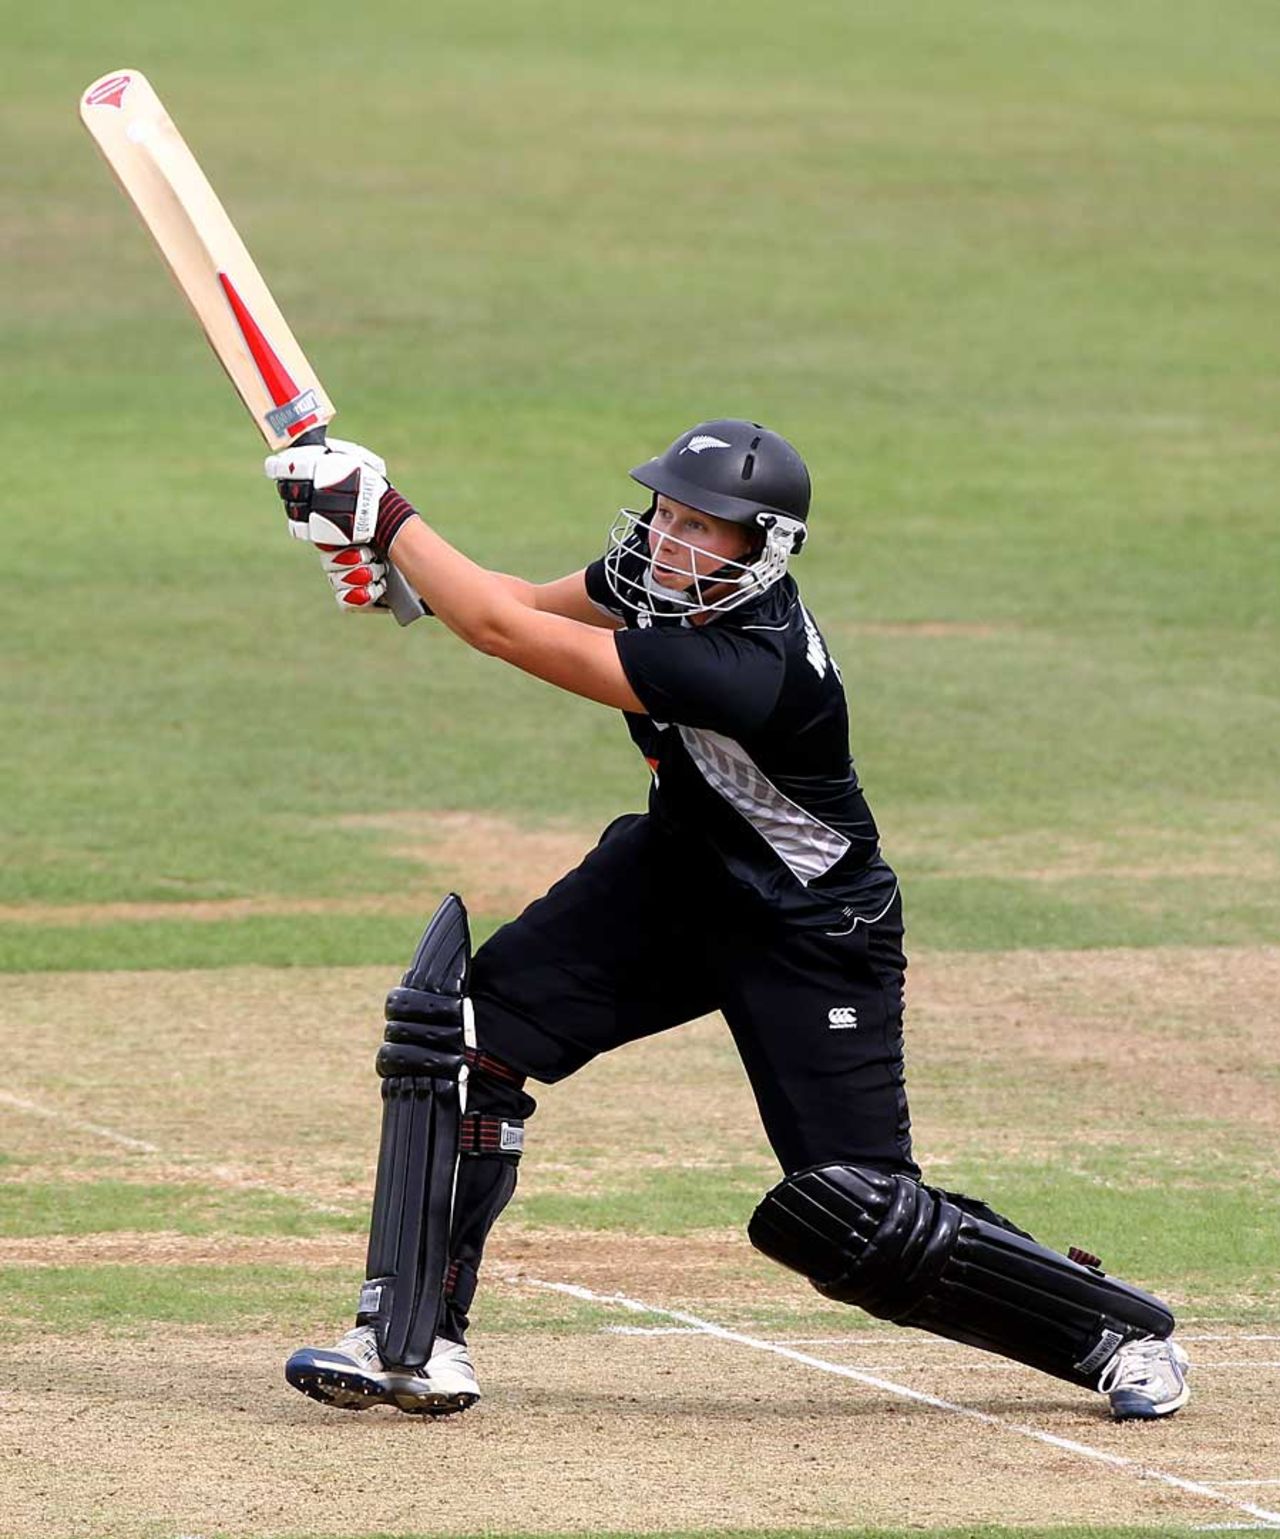 Aimee Watkins led New Zealand's recovery with 68 off 65 balls, England Women v New Zealand Women, 3rd ODI, Derby, July 15, 2010